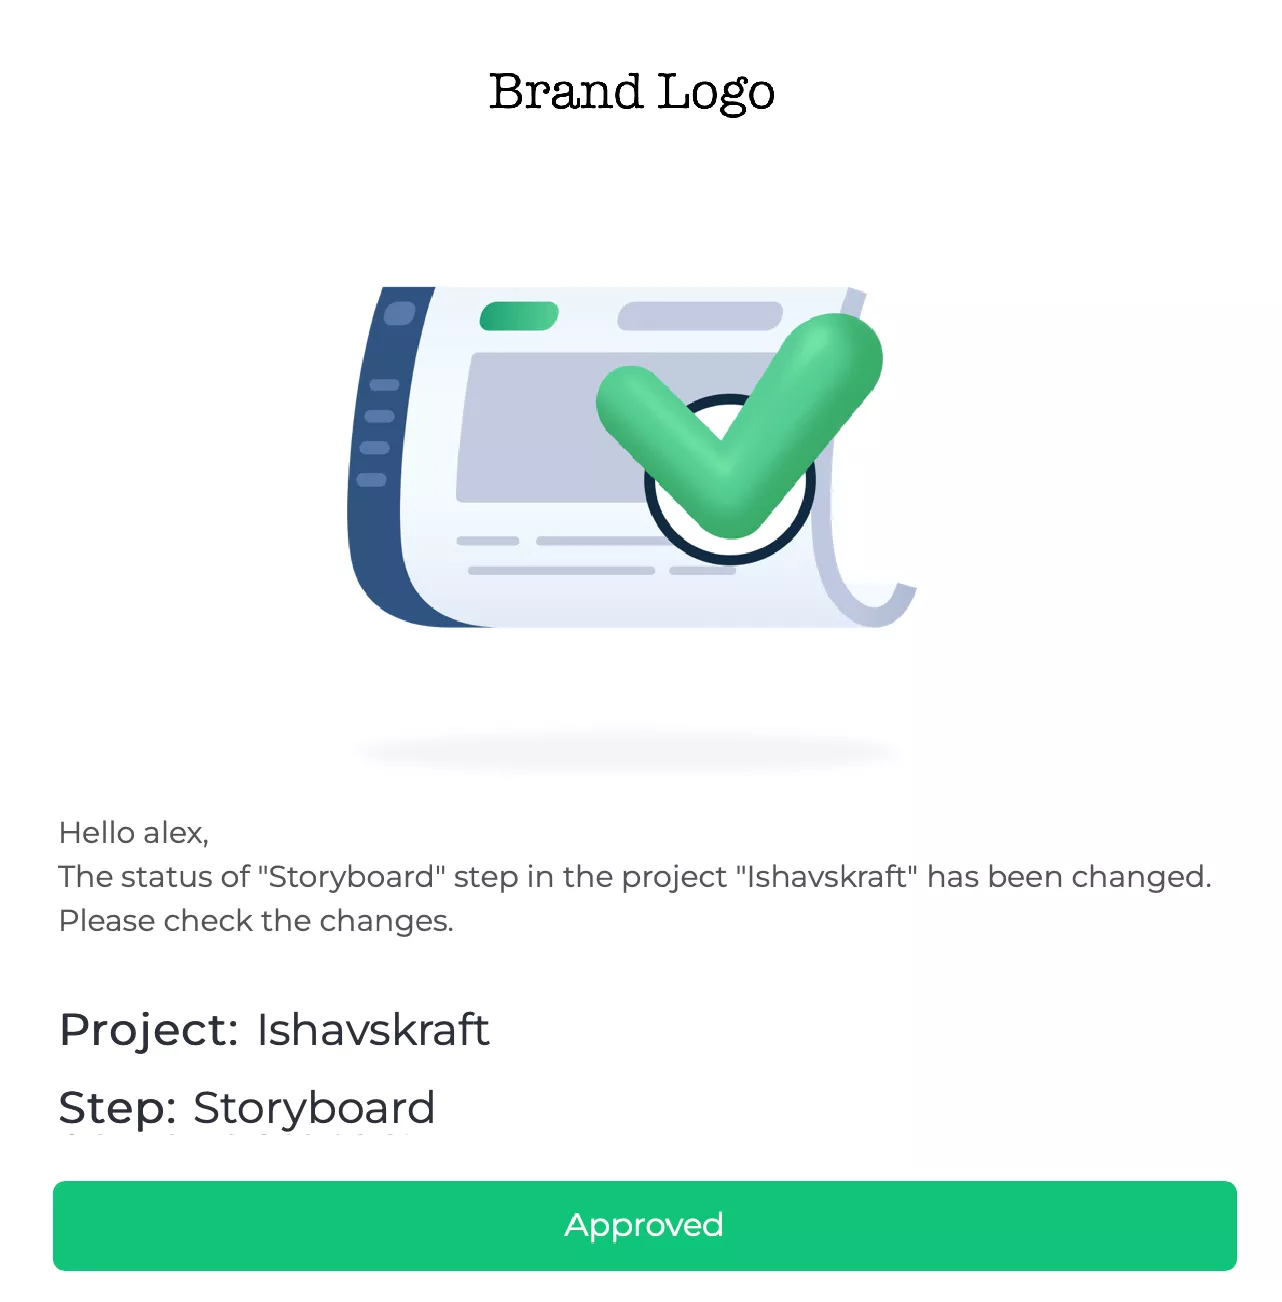 Status update "Approved" with white label brand logo